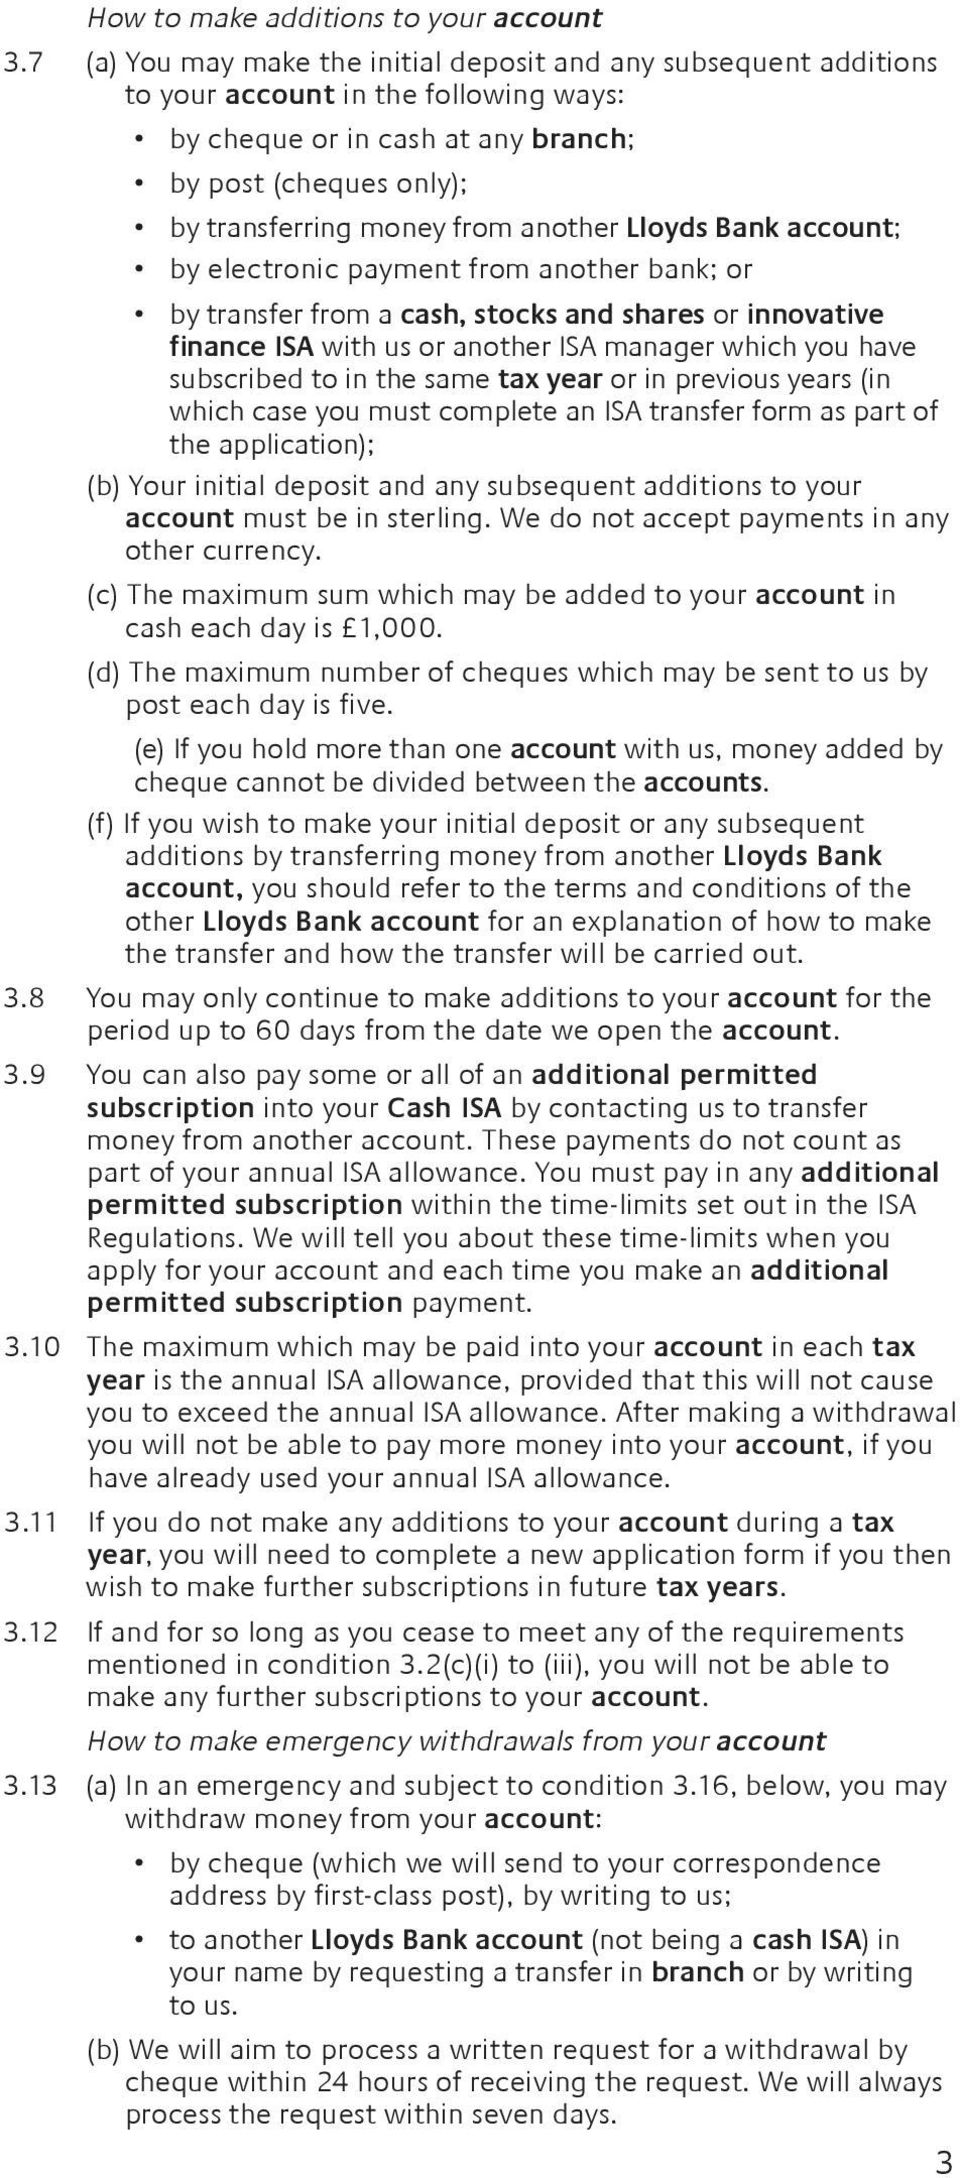 another Lloyds Bank account; by electronic payment from another bank; or by transfer from a cash, stocks and shares or innovative finance ISA with us or another ISA manager which you have subscribed